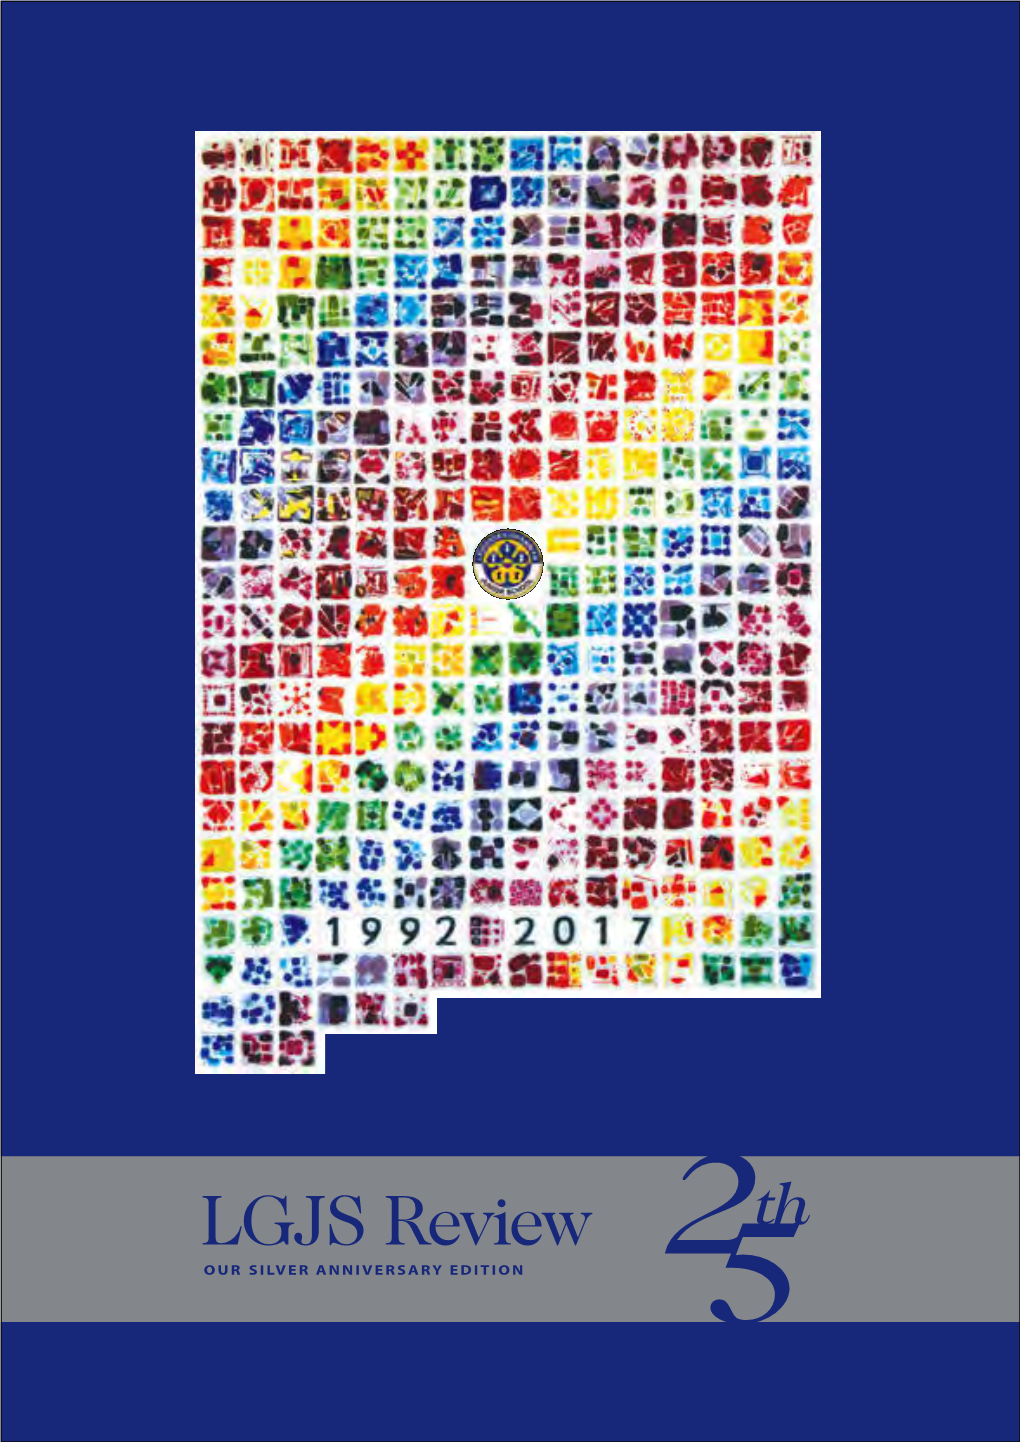 LGJS Review Th OUR SILVER ANNIVERSARY EDITION 25 Review Magazine Introduction